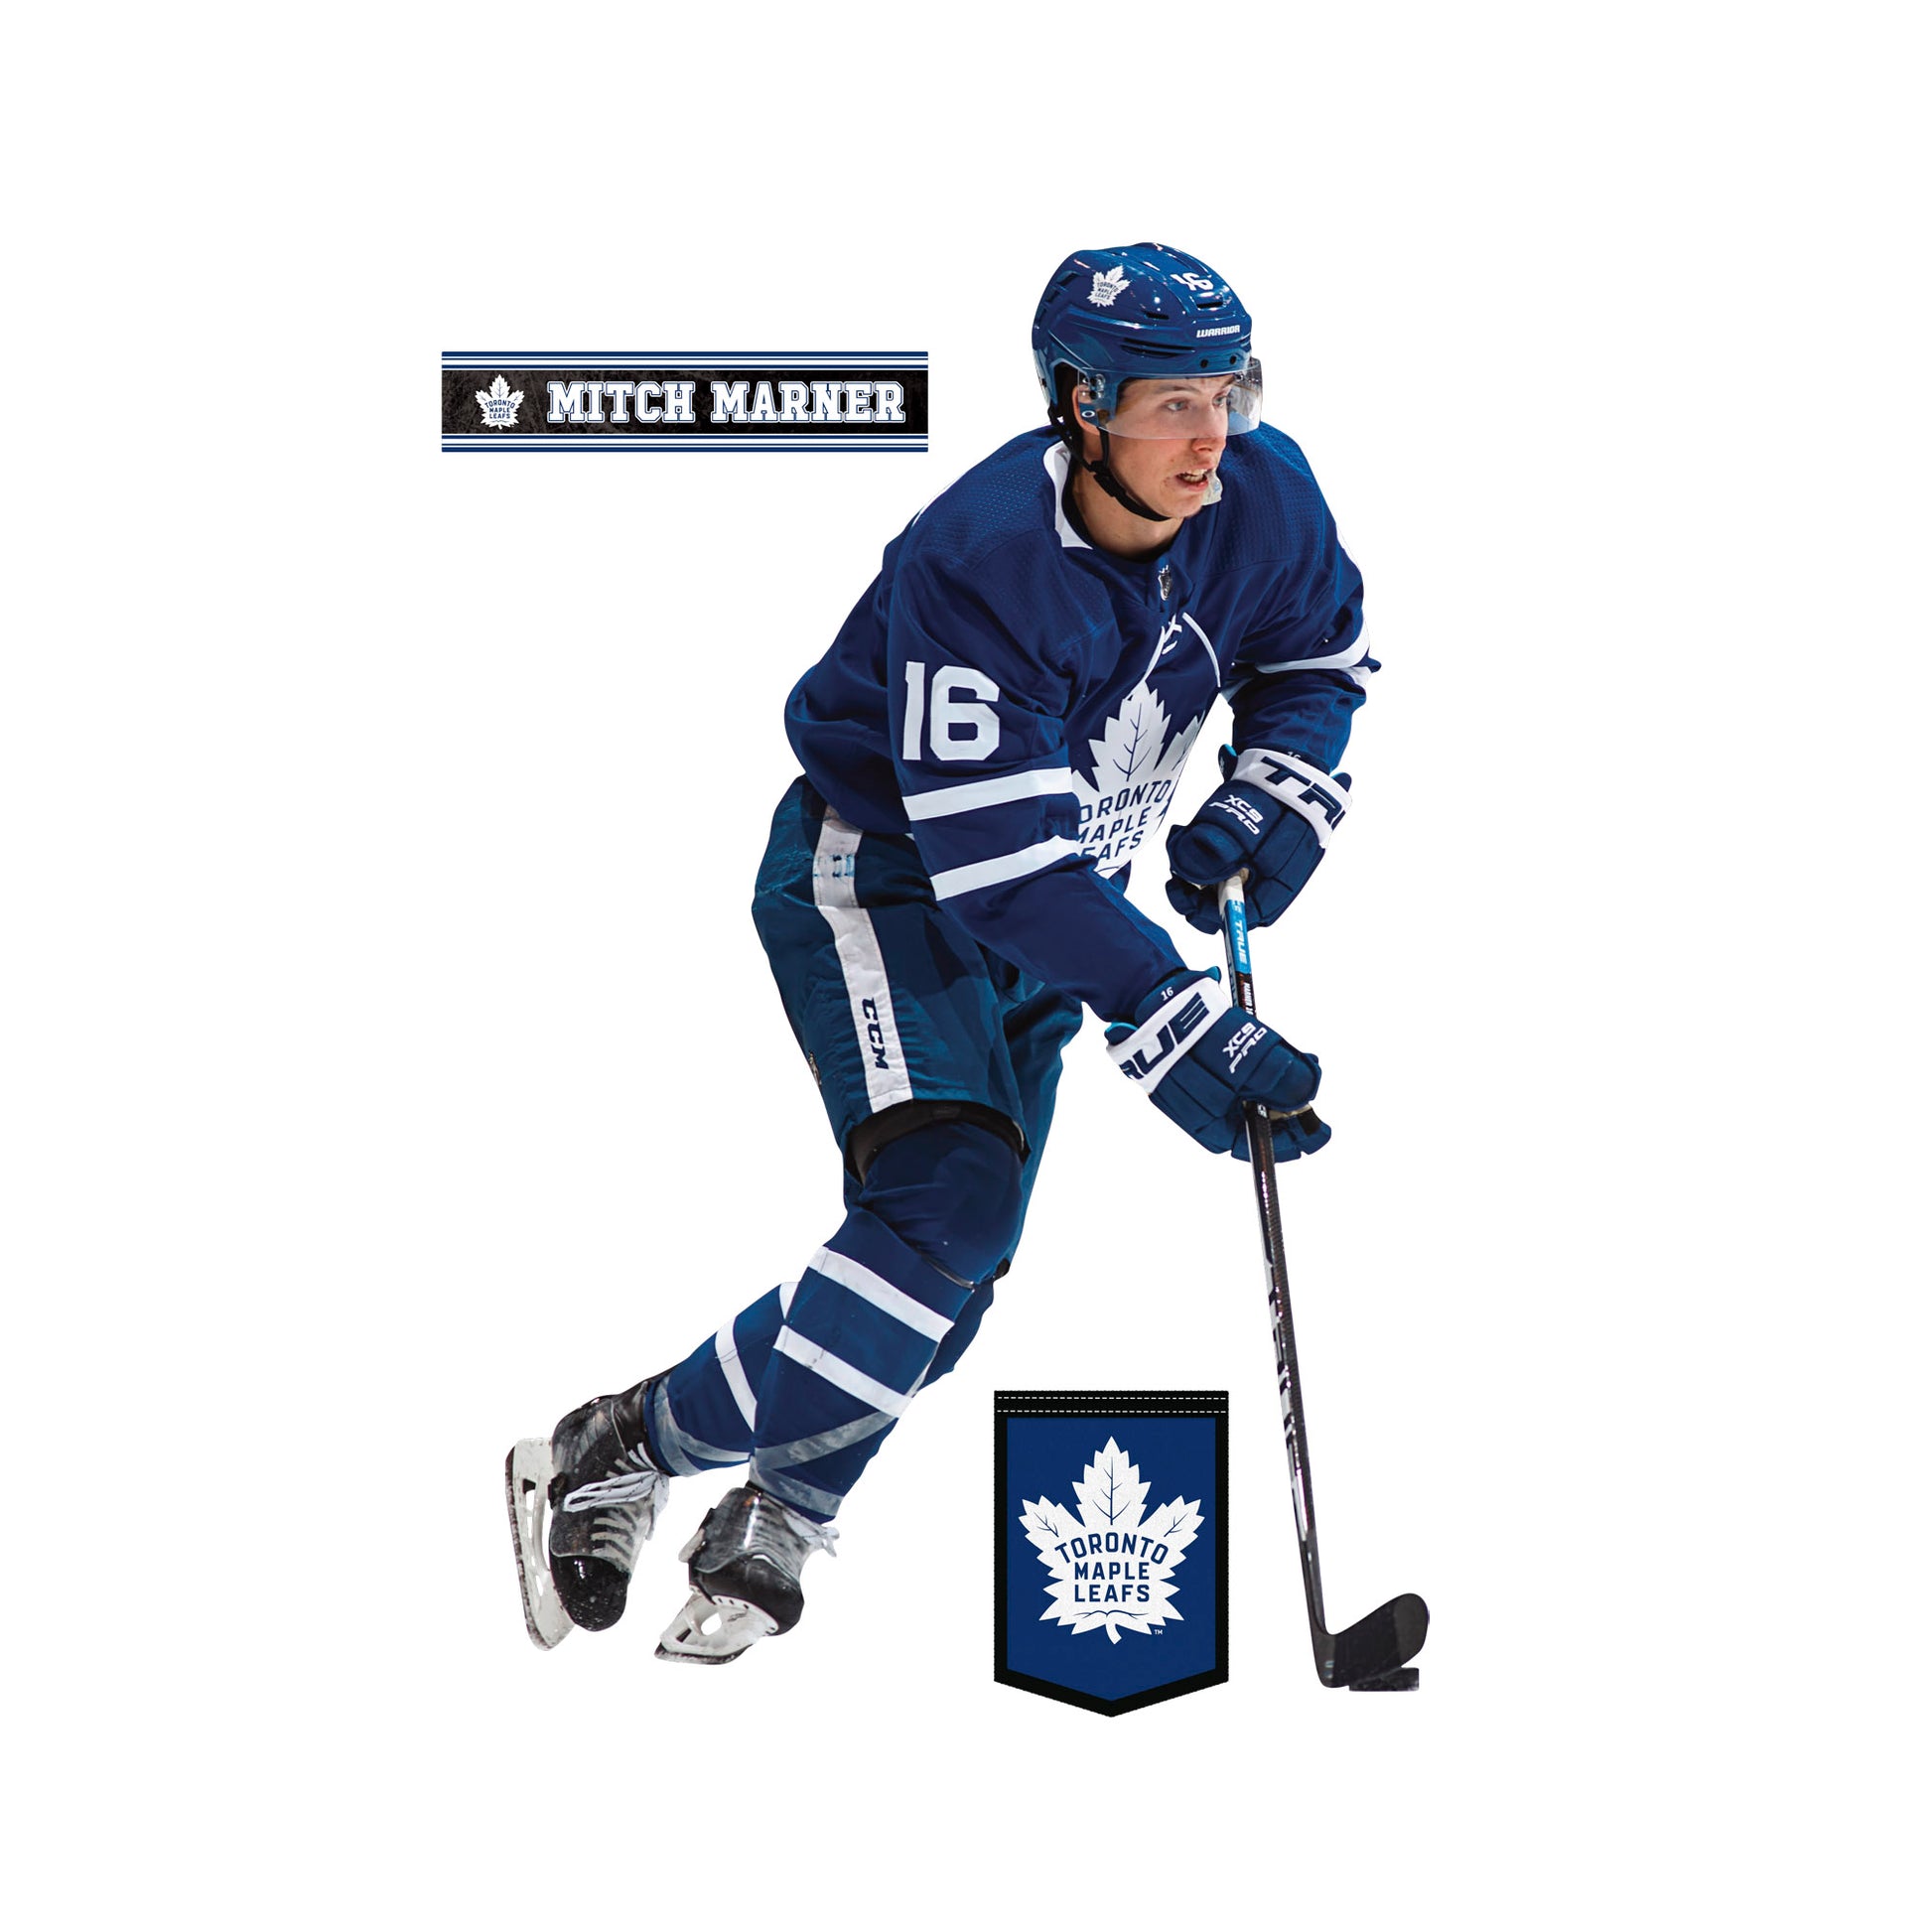 Mitch Marner Gifts & Merchandise for Sale